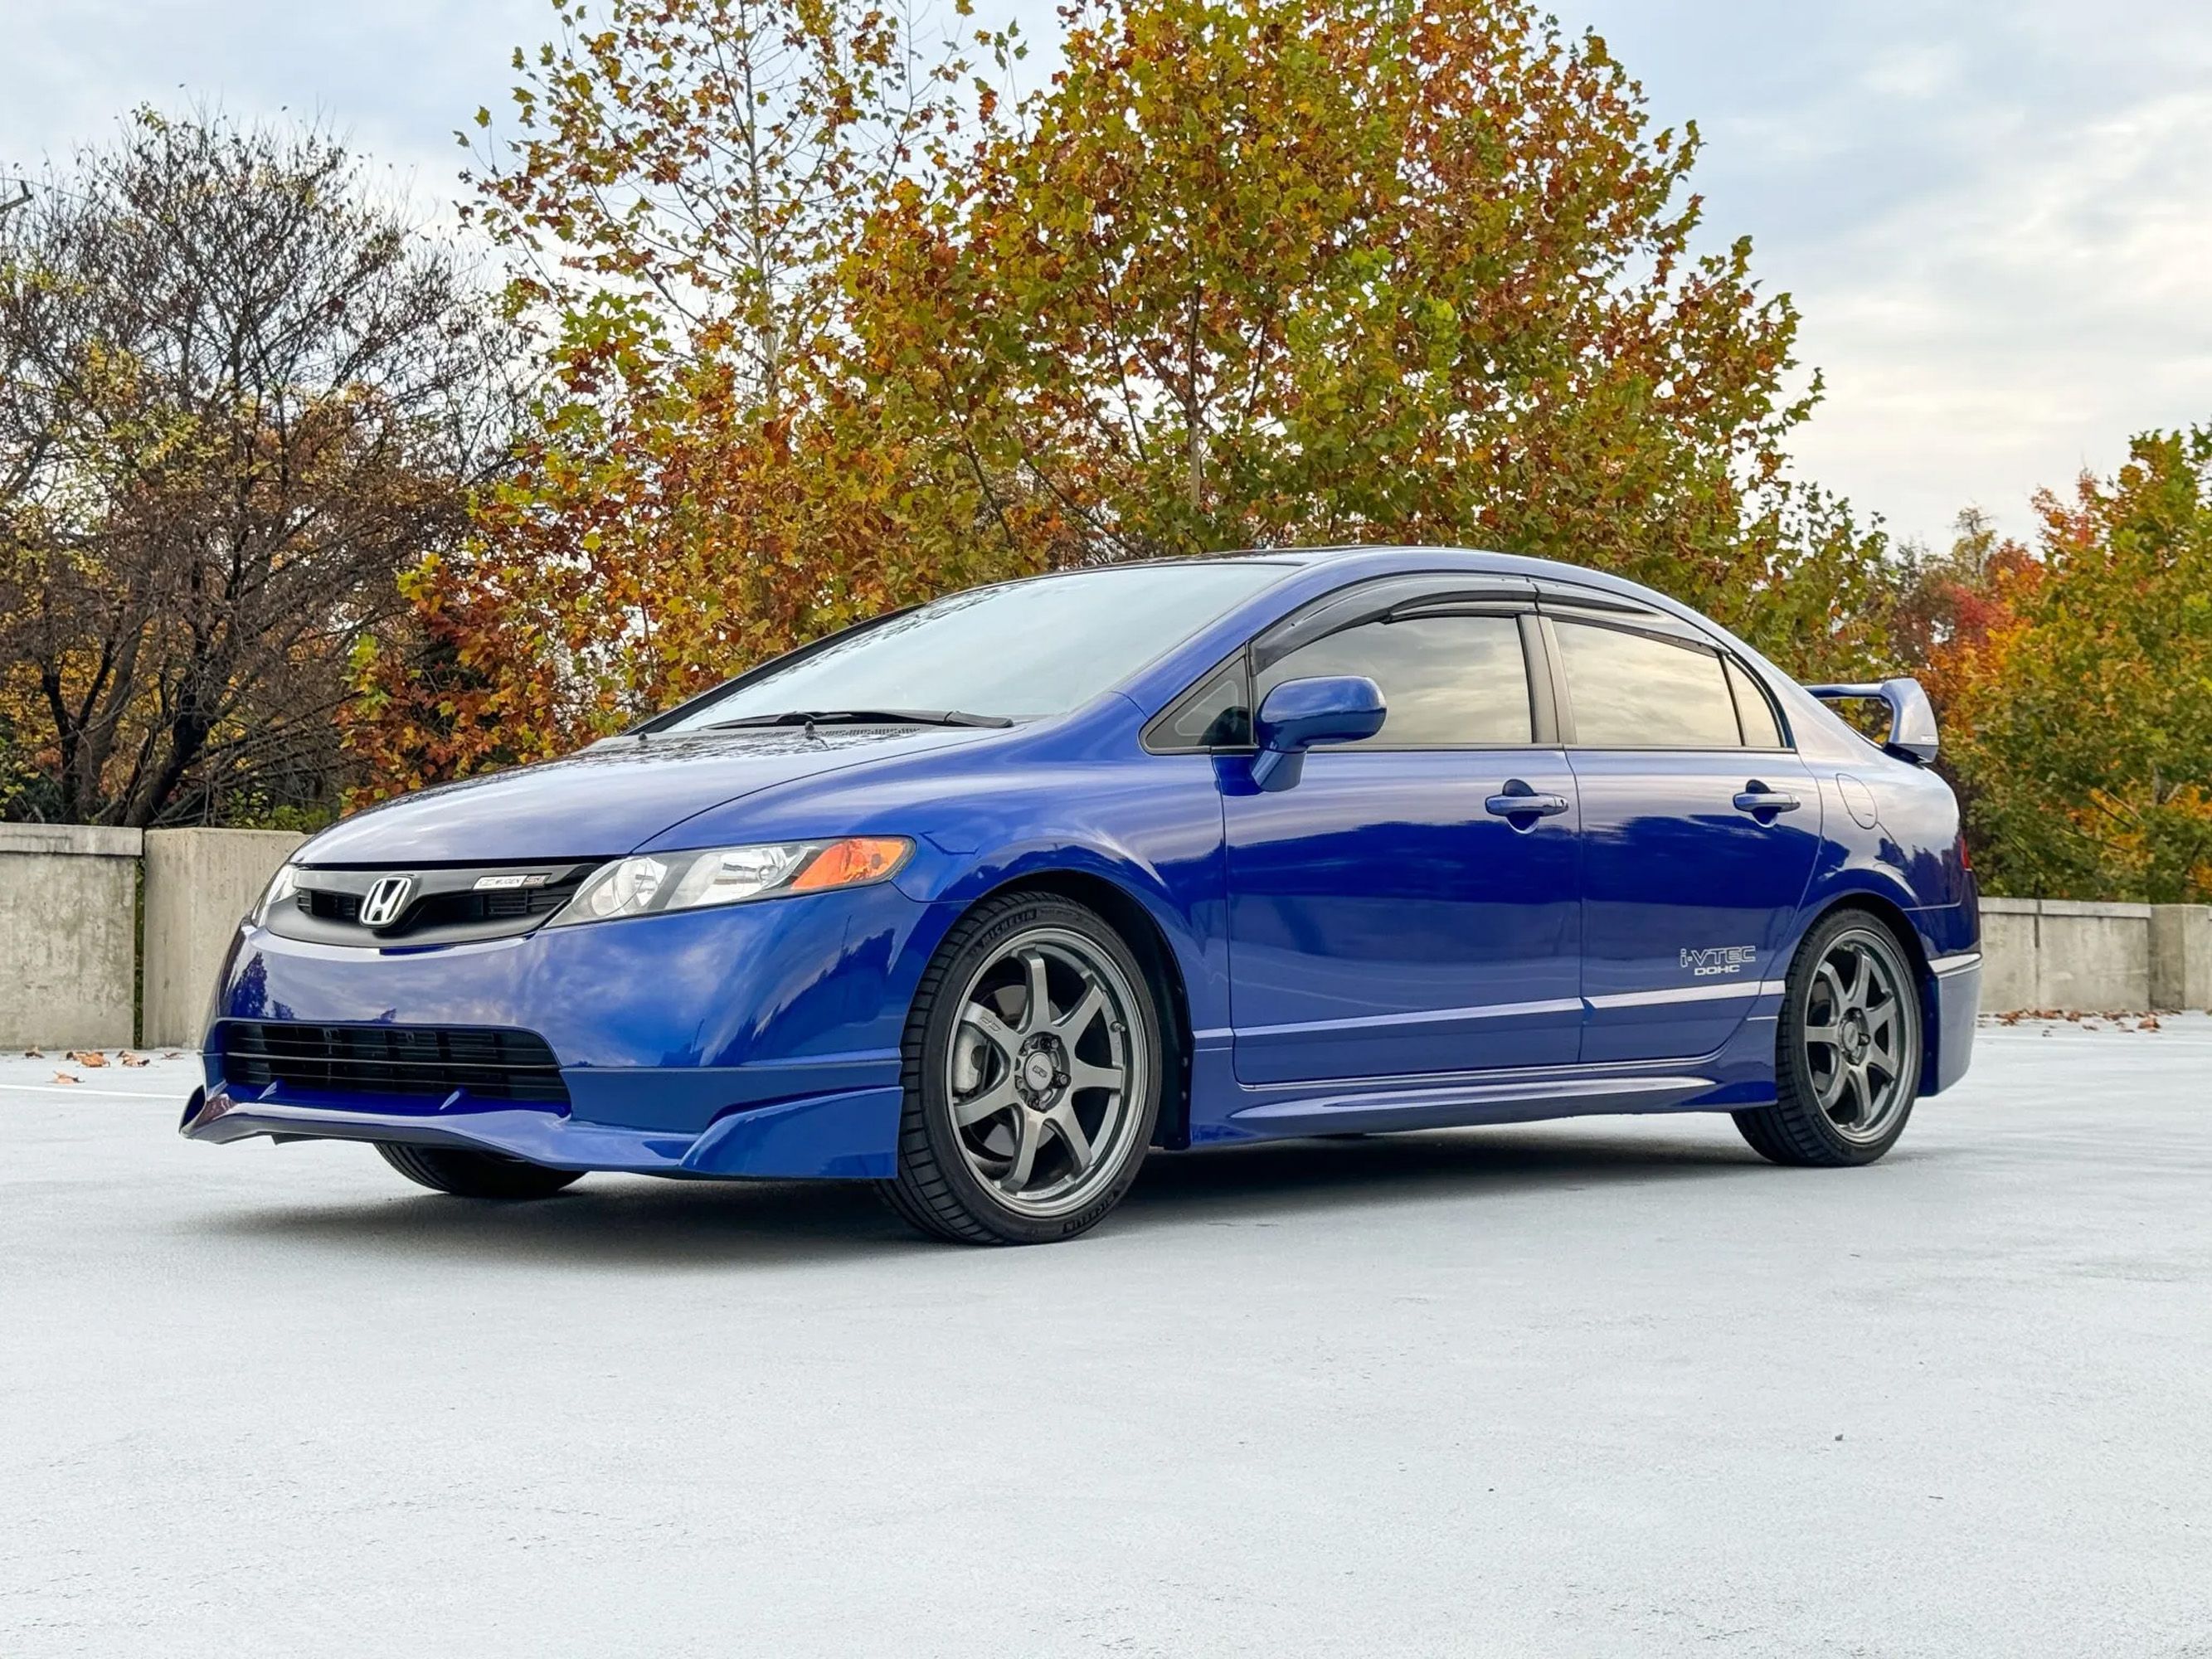 2008 Honda Civic Mugen Si Is Today's Bring a Trailer Find